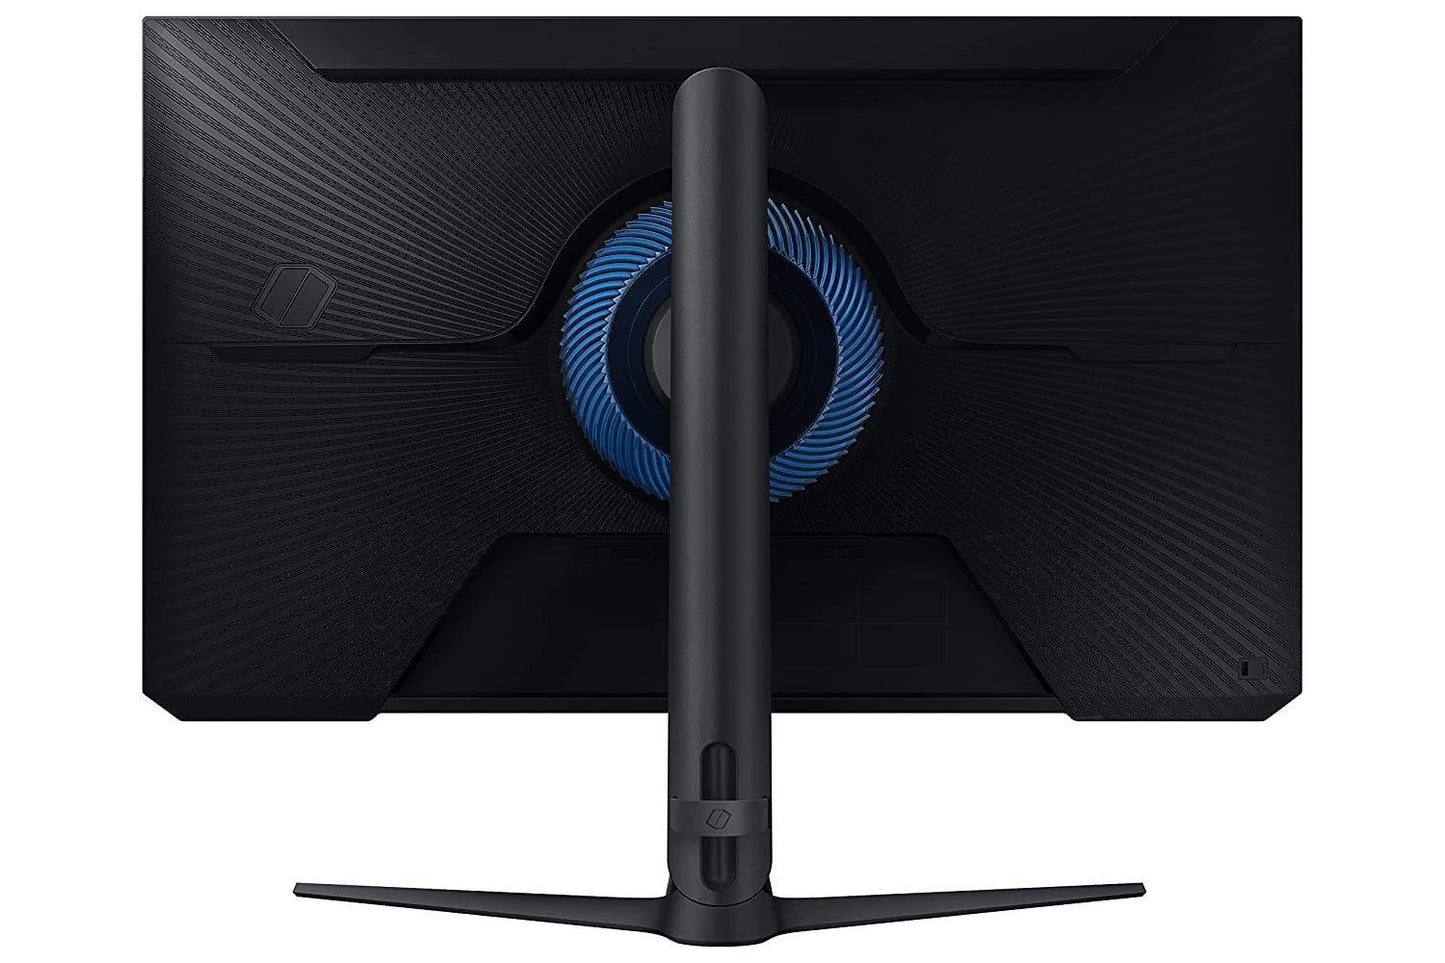 Samsung 68.6cm (27") 178° All Around Viewing Angle Gaming Monitor with AMD freeSync, 144Hz Refresh Rate (LS27AG300NWXXL, Black) - Store For Gamers